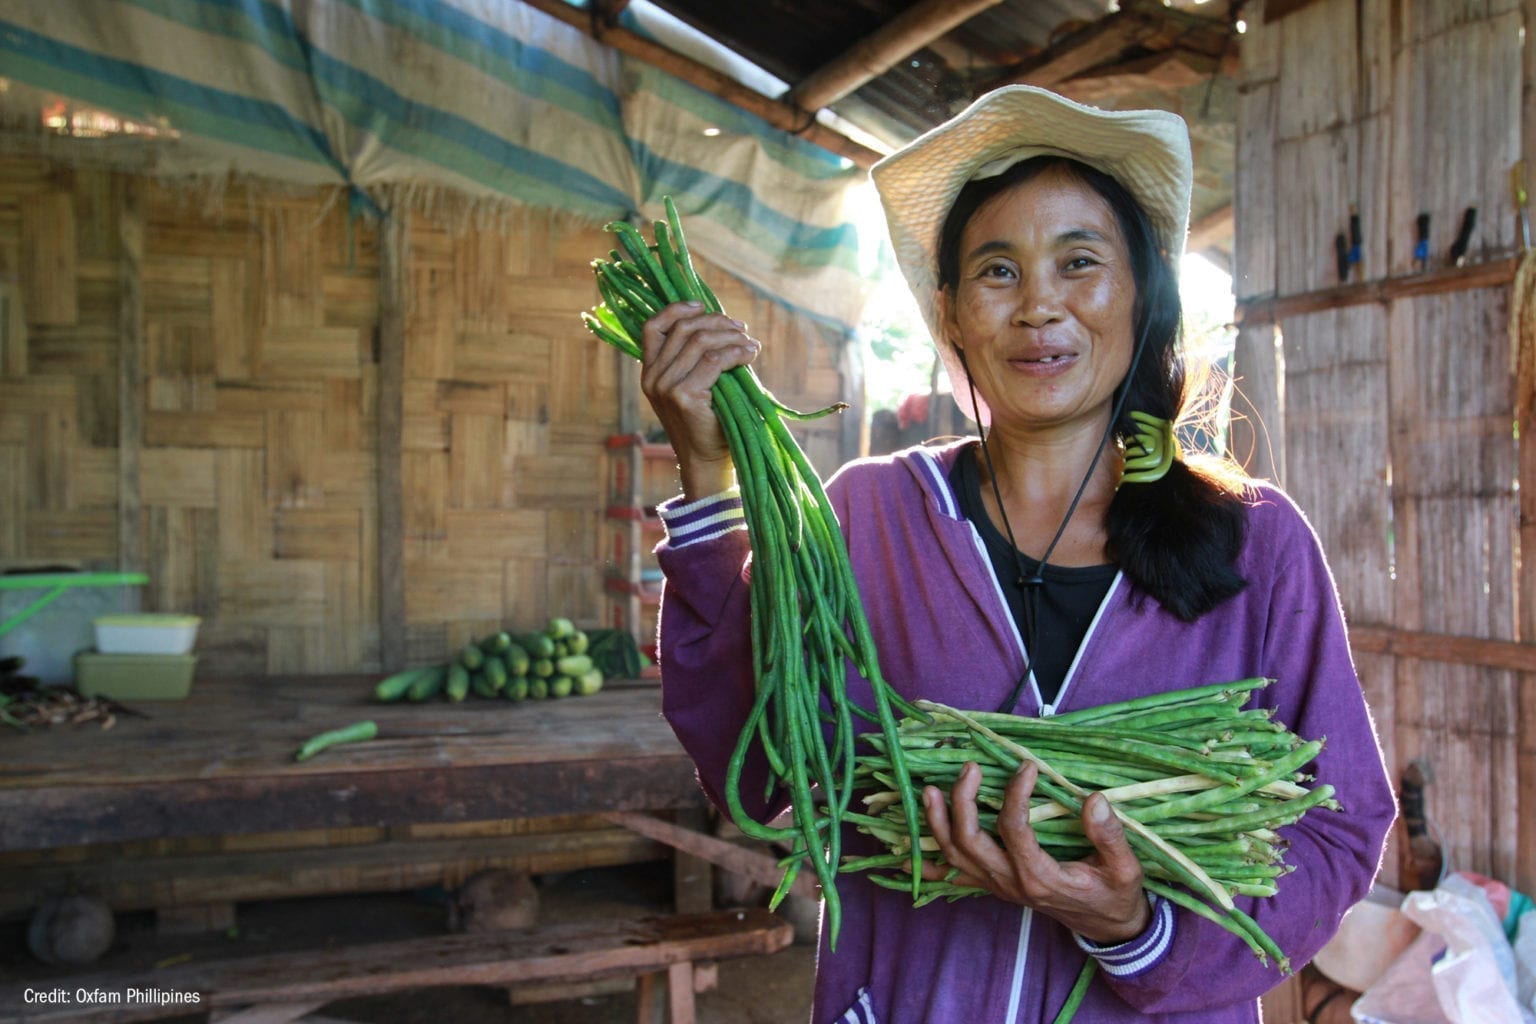 Meet Milagrosa from the Phillipines who has been helped by the Annie Sloan and Oxfam collaboration